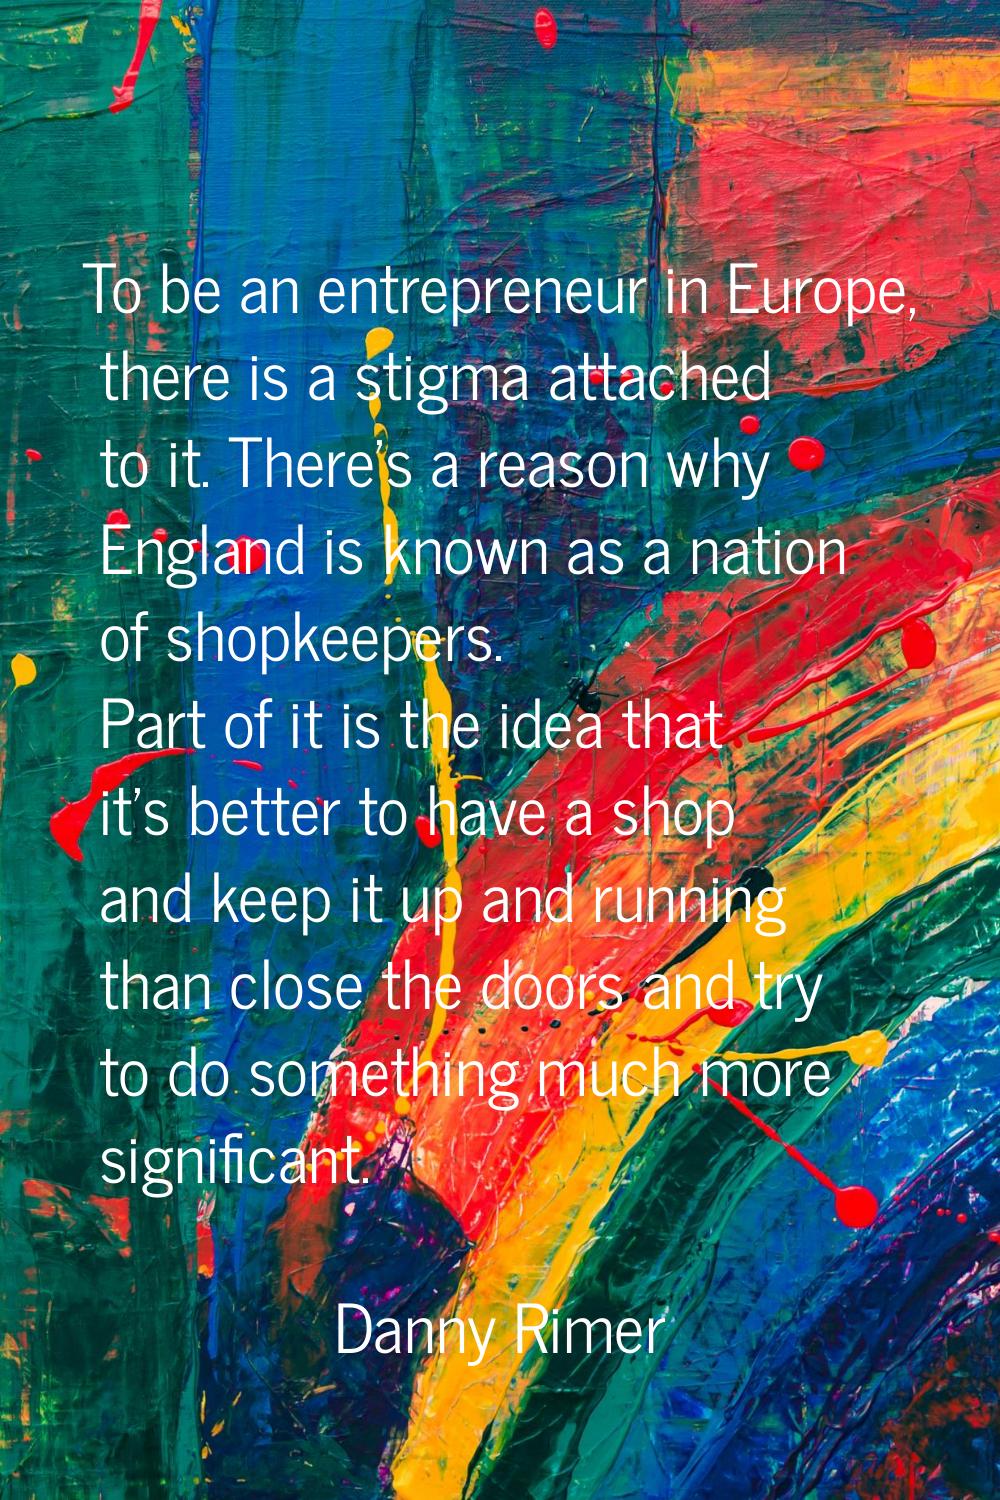 To be an entrepreneur in Europe, there is a stigma attached to it. There's a reason why England is 